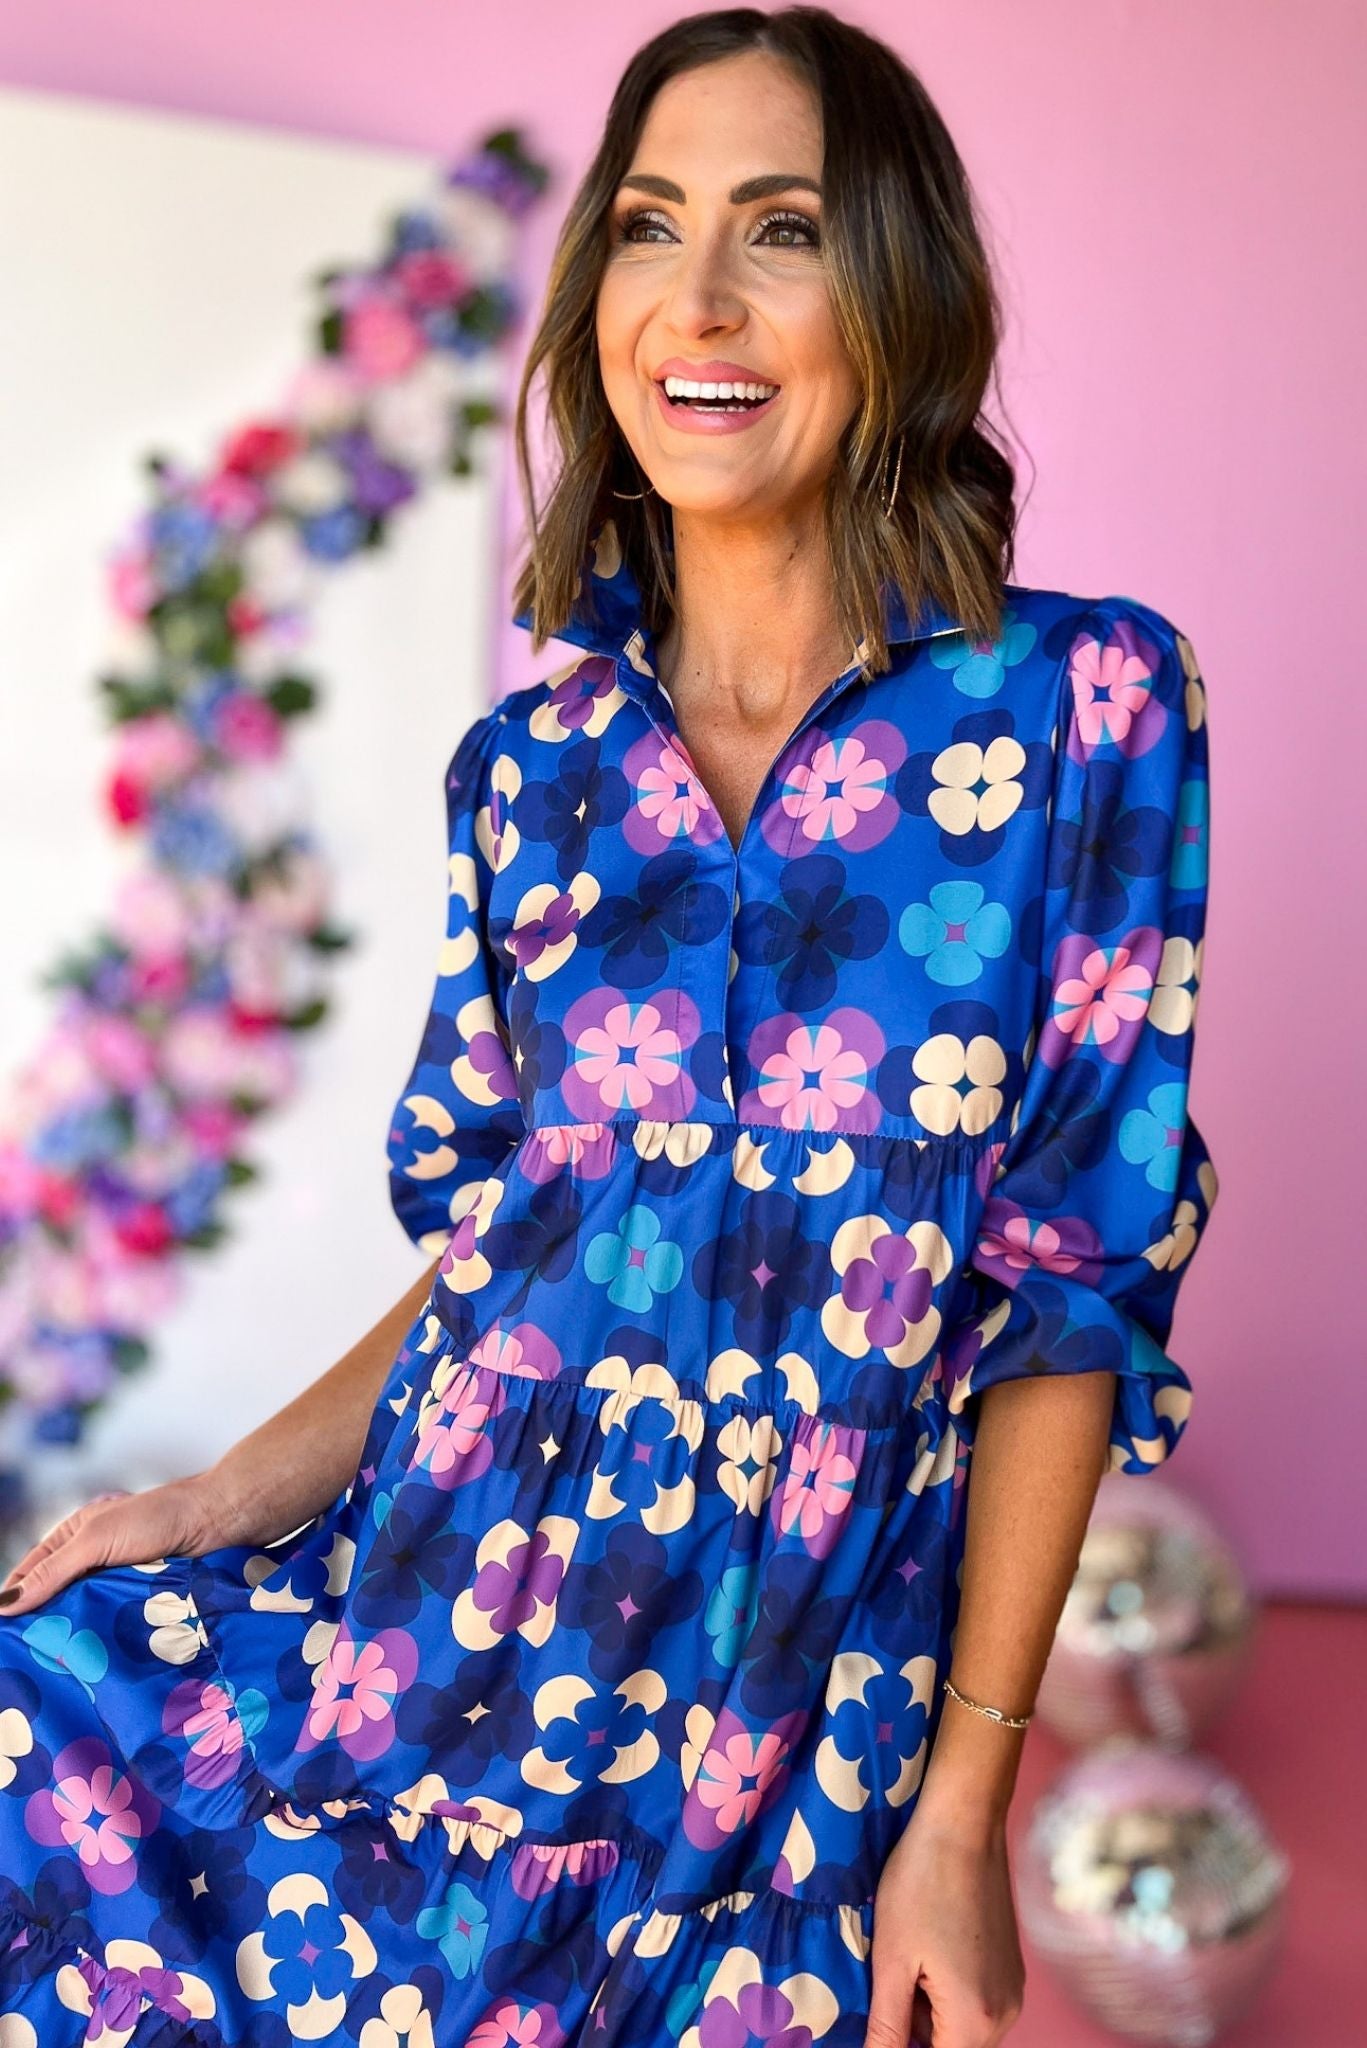 SSYS Vintage Petals Print Long Sleeve Collared Maxi Dress, pops and prints, must have, floral, midi dress, mom style, shop style your senses by mallory fitzsimmons